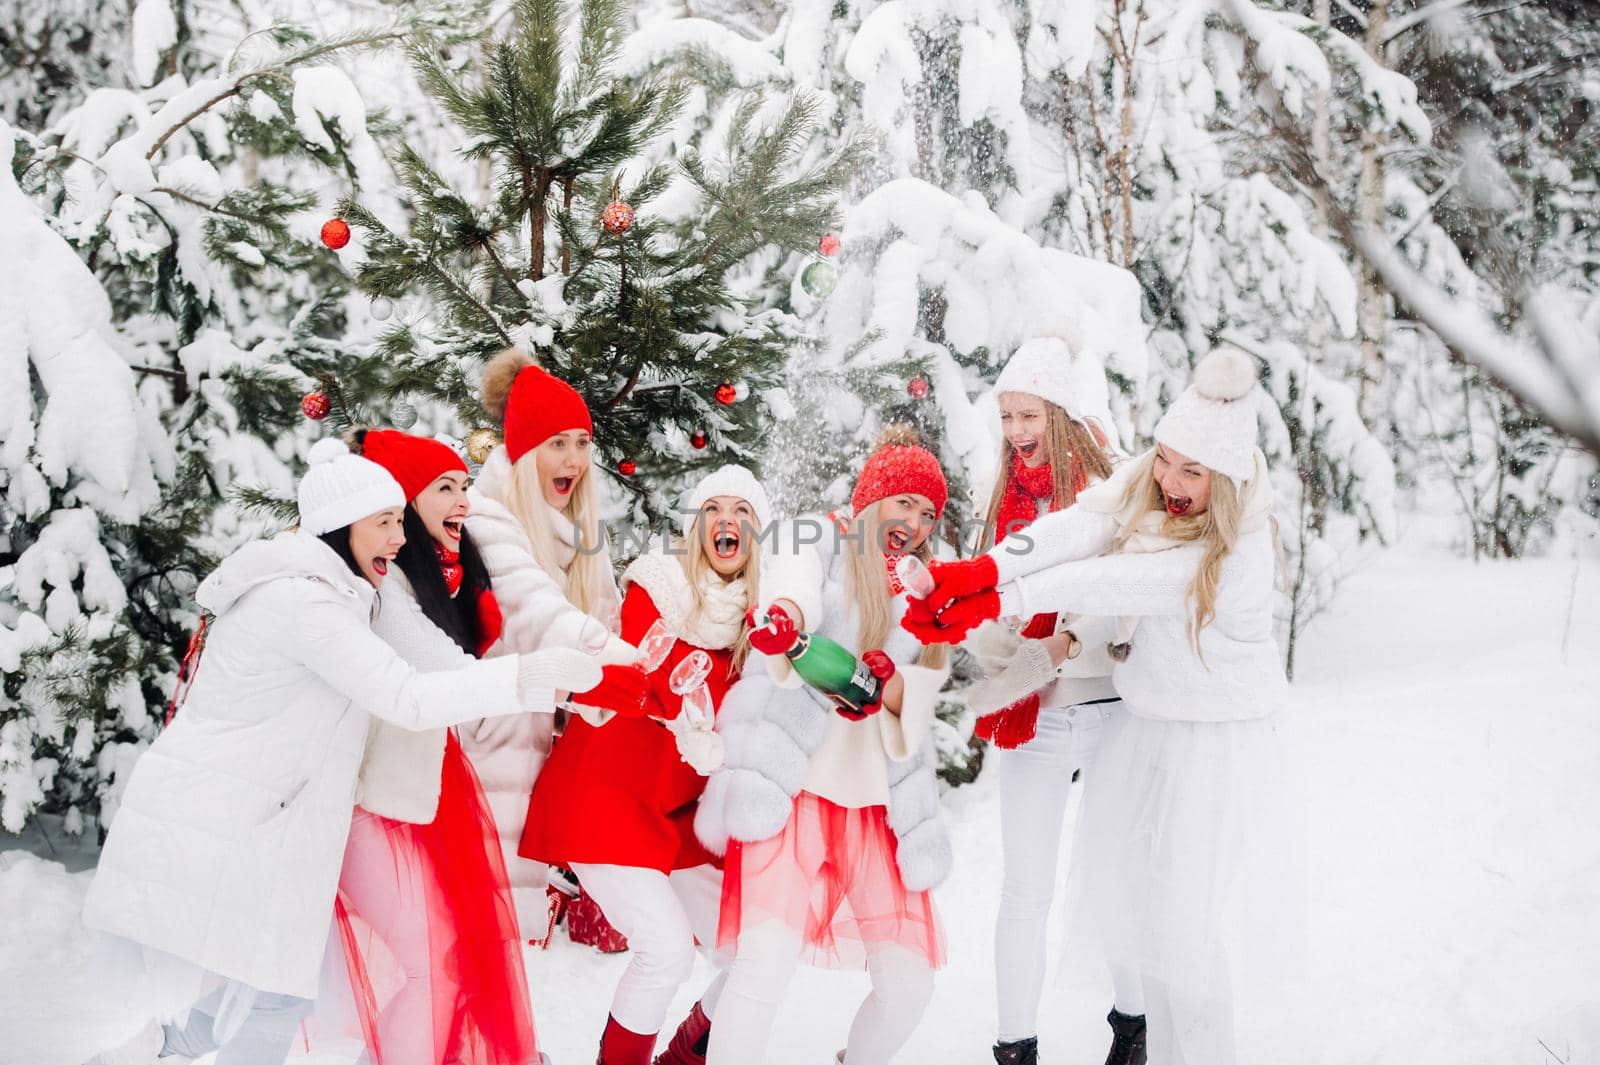 A large group of girls with glasses of champagne in their hands stands in the winter forest.Girls in red and white clothes with new year's drinks in a snow-covered forest. by Lobachad